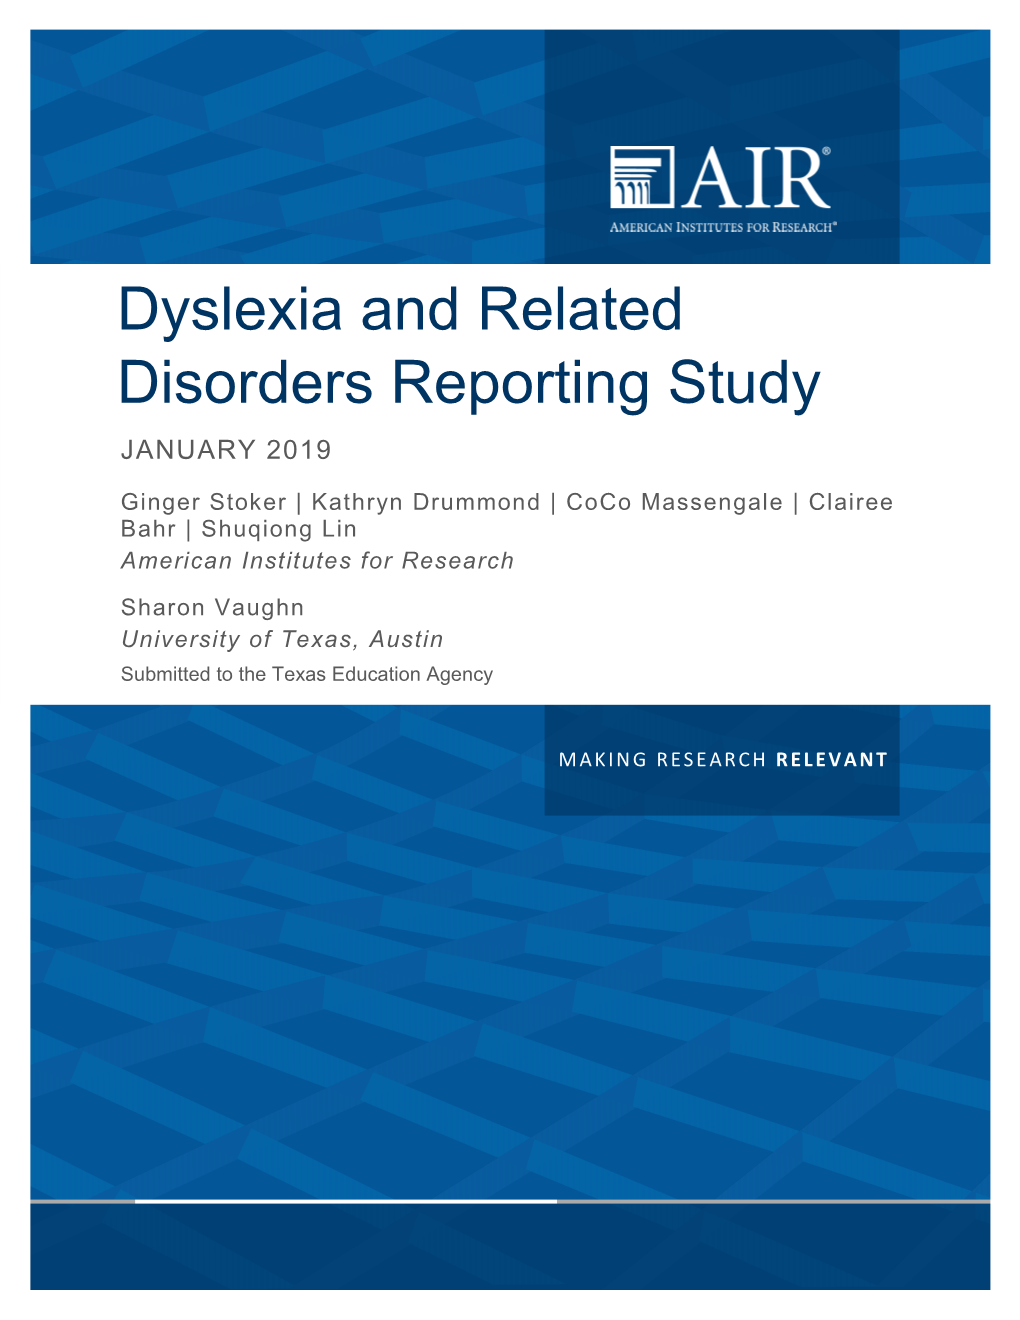 Dyslexia and Related Disorders Reporting Study JANUARY 2019